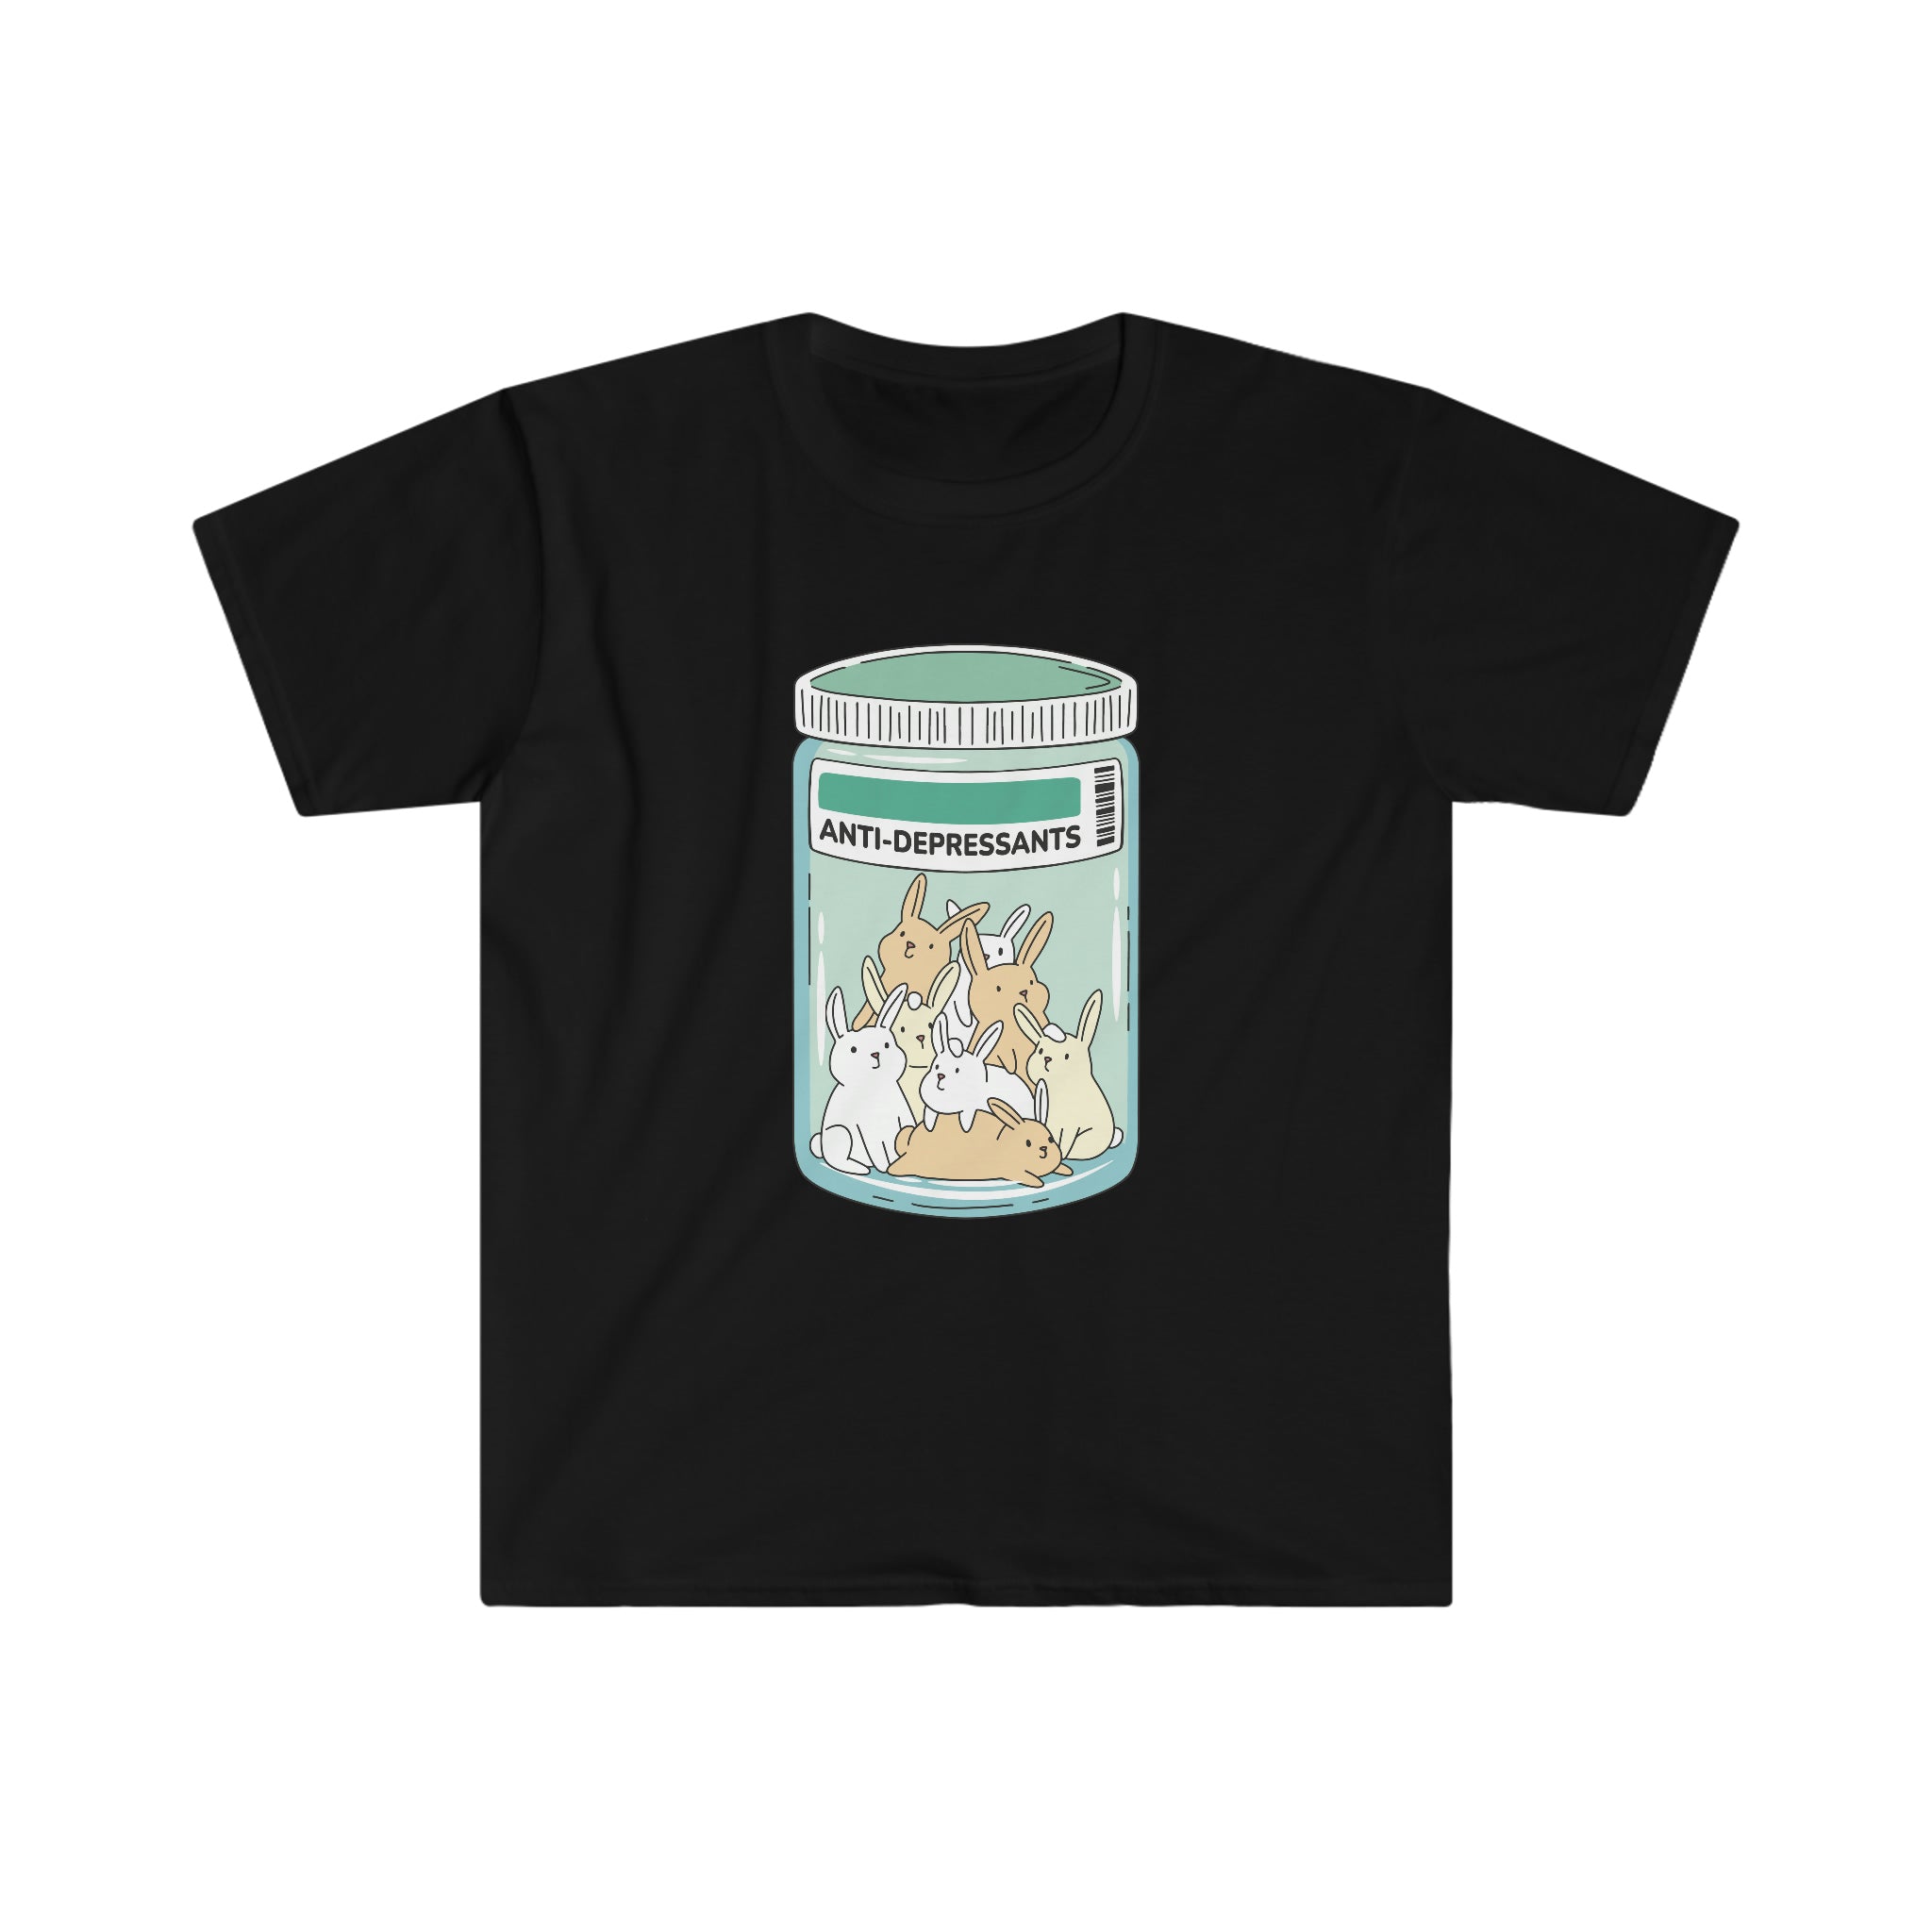 A Antidepressants Bunnies T-Shirt featuring an image of a rabbit in a jar, perfect for adding some style to your wardrobe.